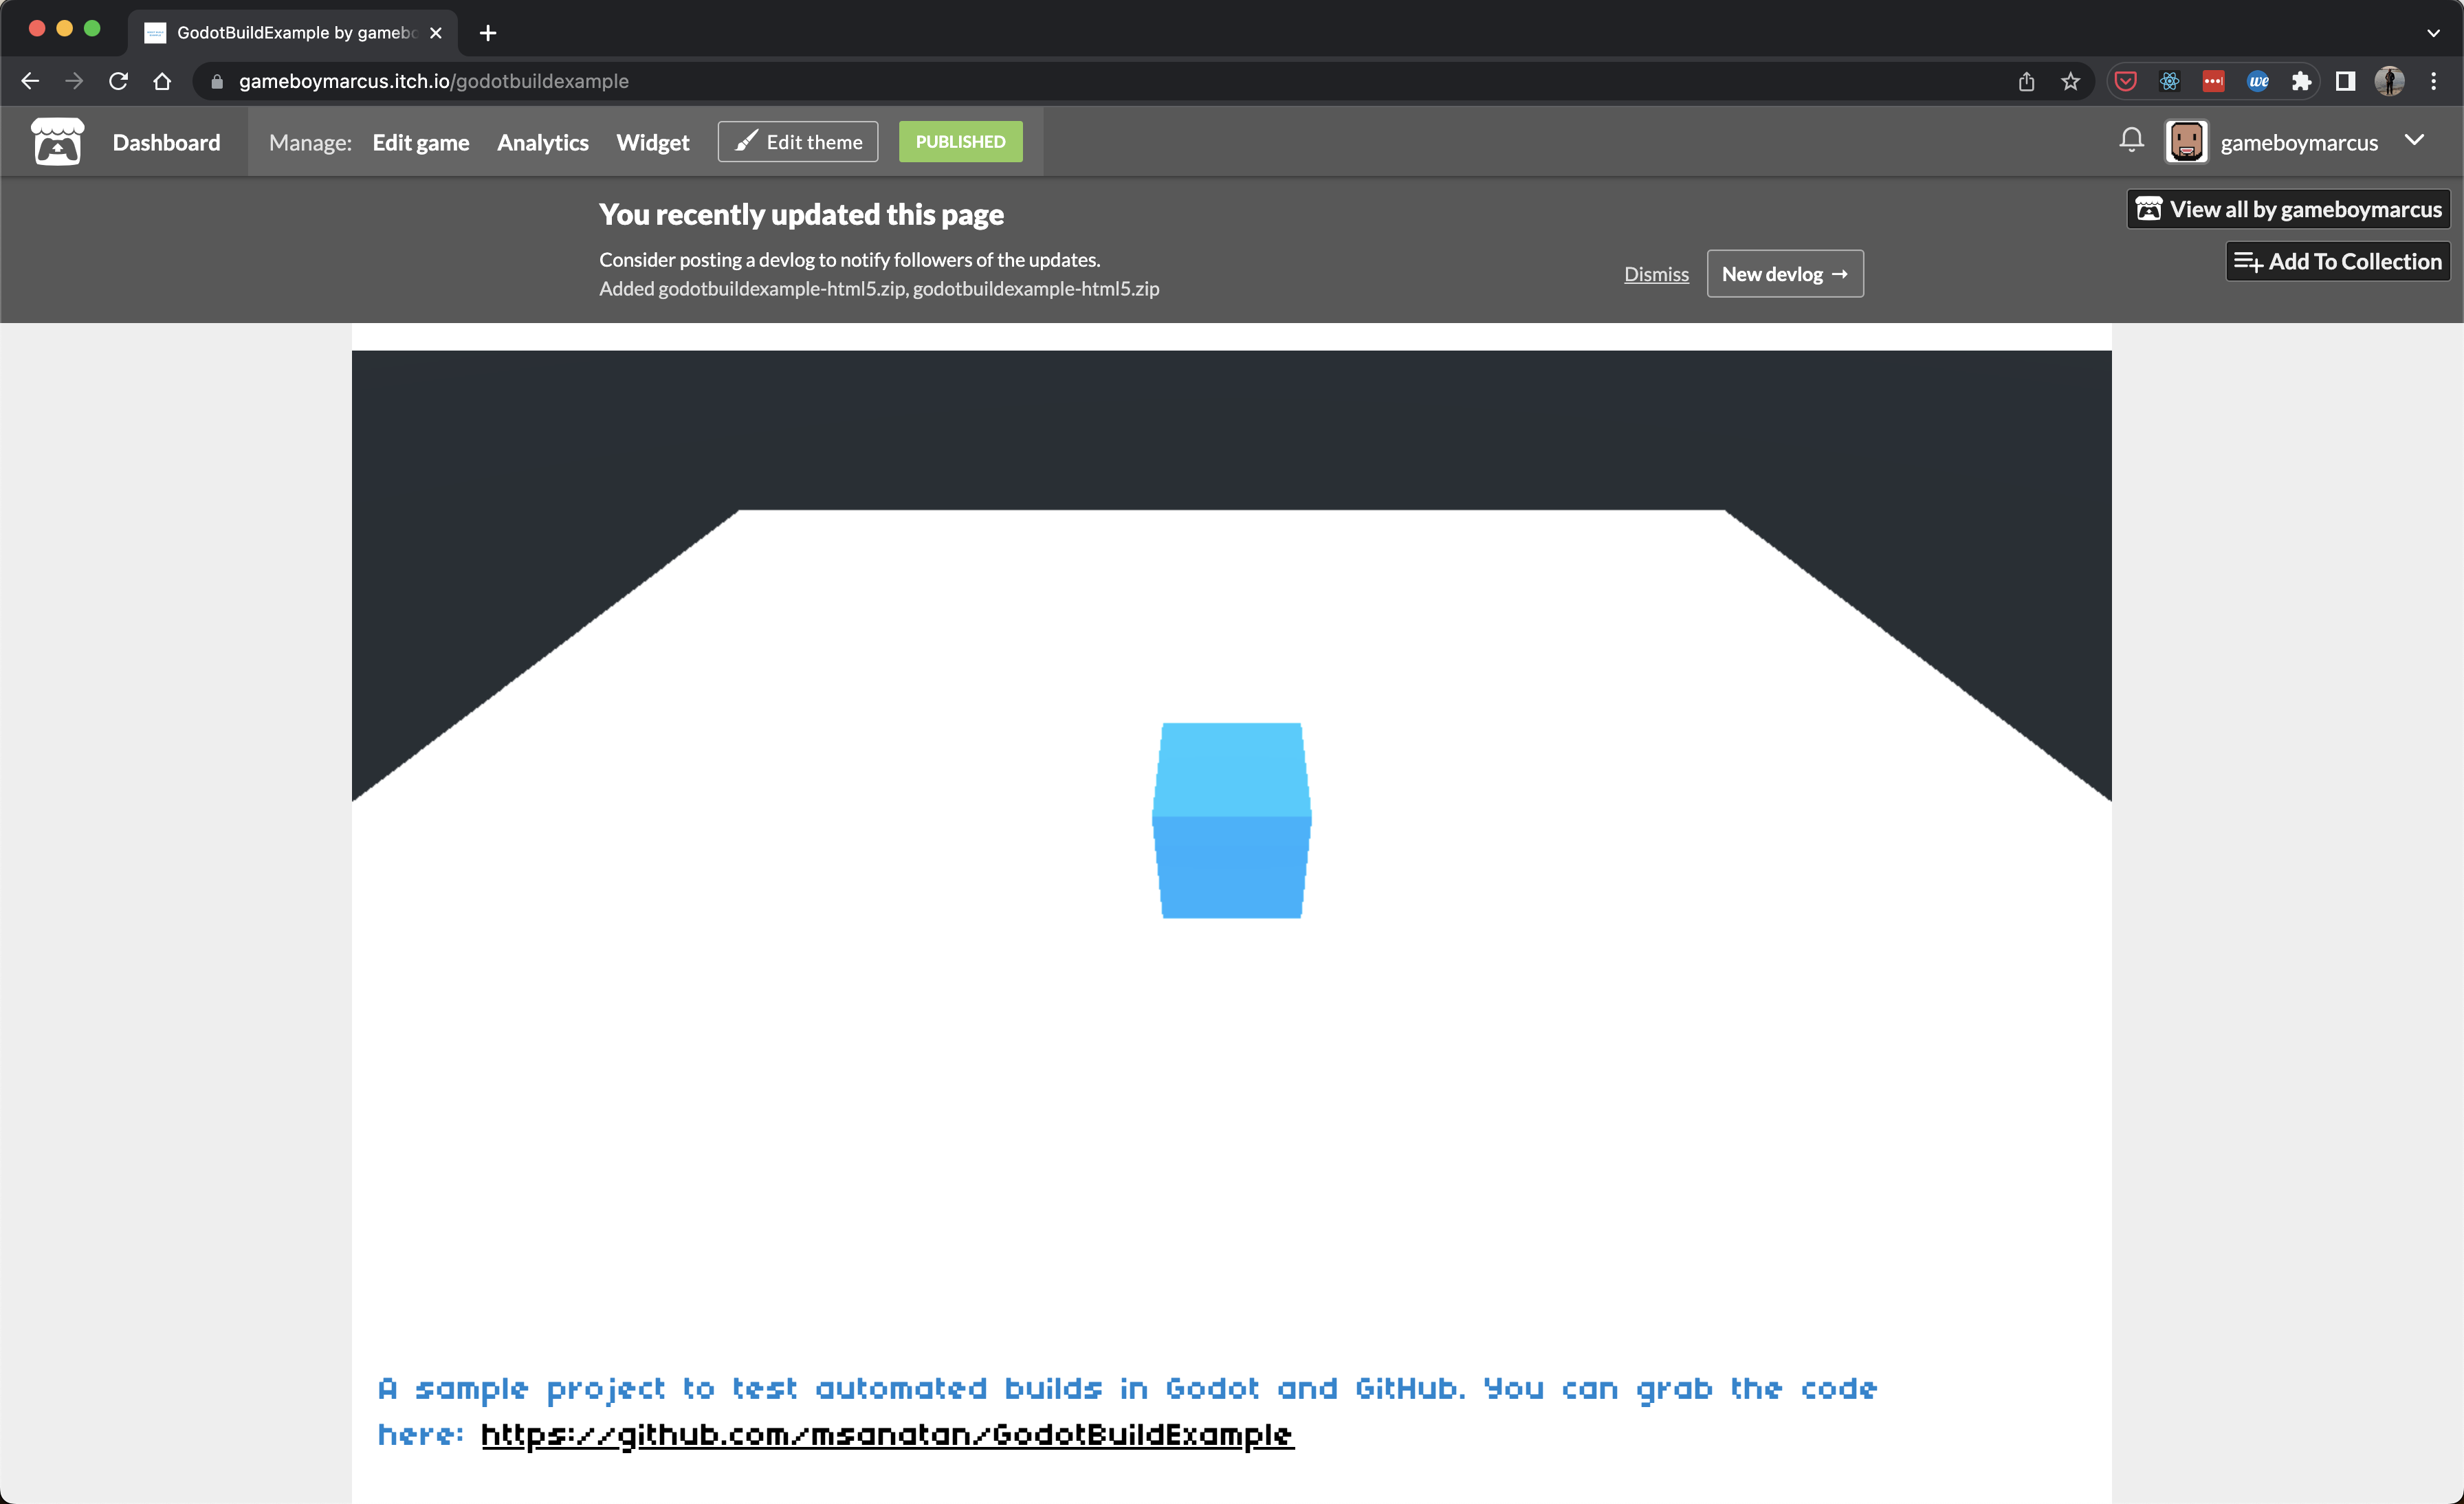 Screenshot of example Godot build project deployed on itch.io